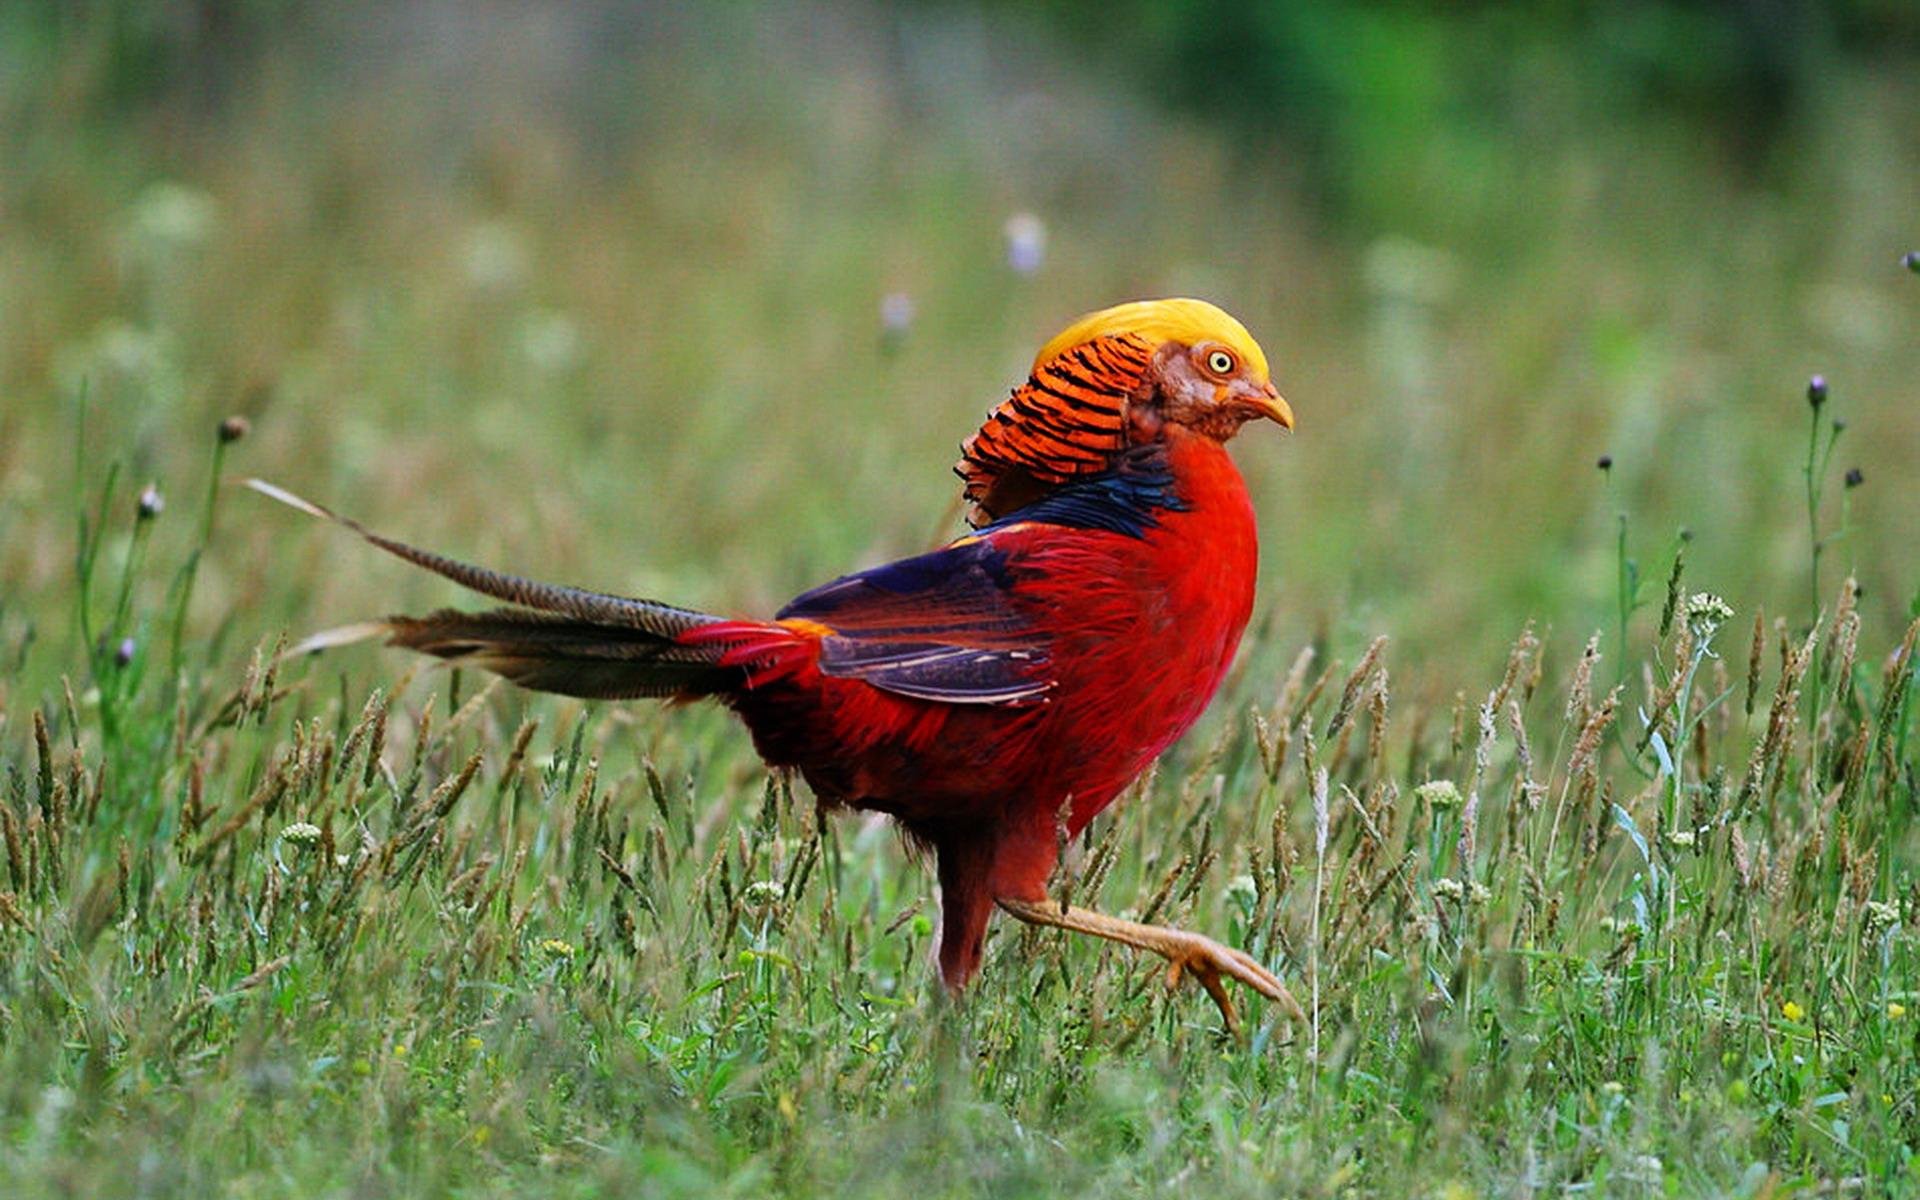 Golden Pheasant Full Hd Wallpaper And Background Image HD Wallpapers Download Free Map Images Wallpaper [wallpaper376.blogspot.com]